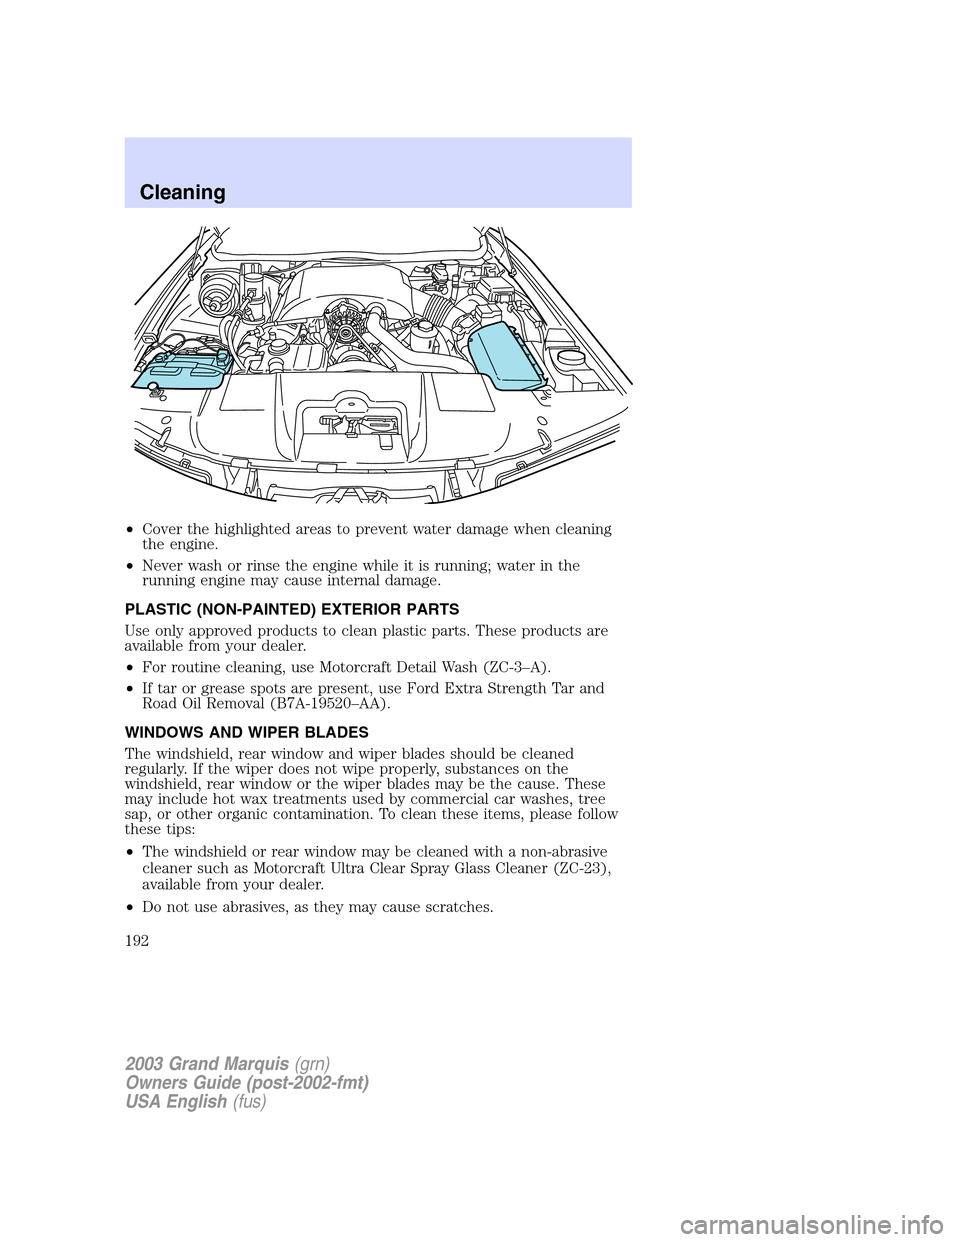 Mercury Grand Marquis 2003  Owners Manuals •Cover the highlighted areas to prevent water damage when cleaning
the engine.
•Never wash or rinse the engine while it is running; water in the
running engine may cause internal damage.
PLASTIC (